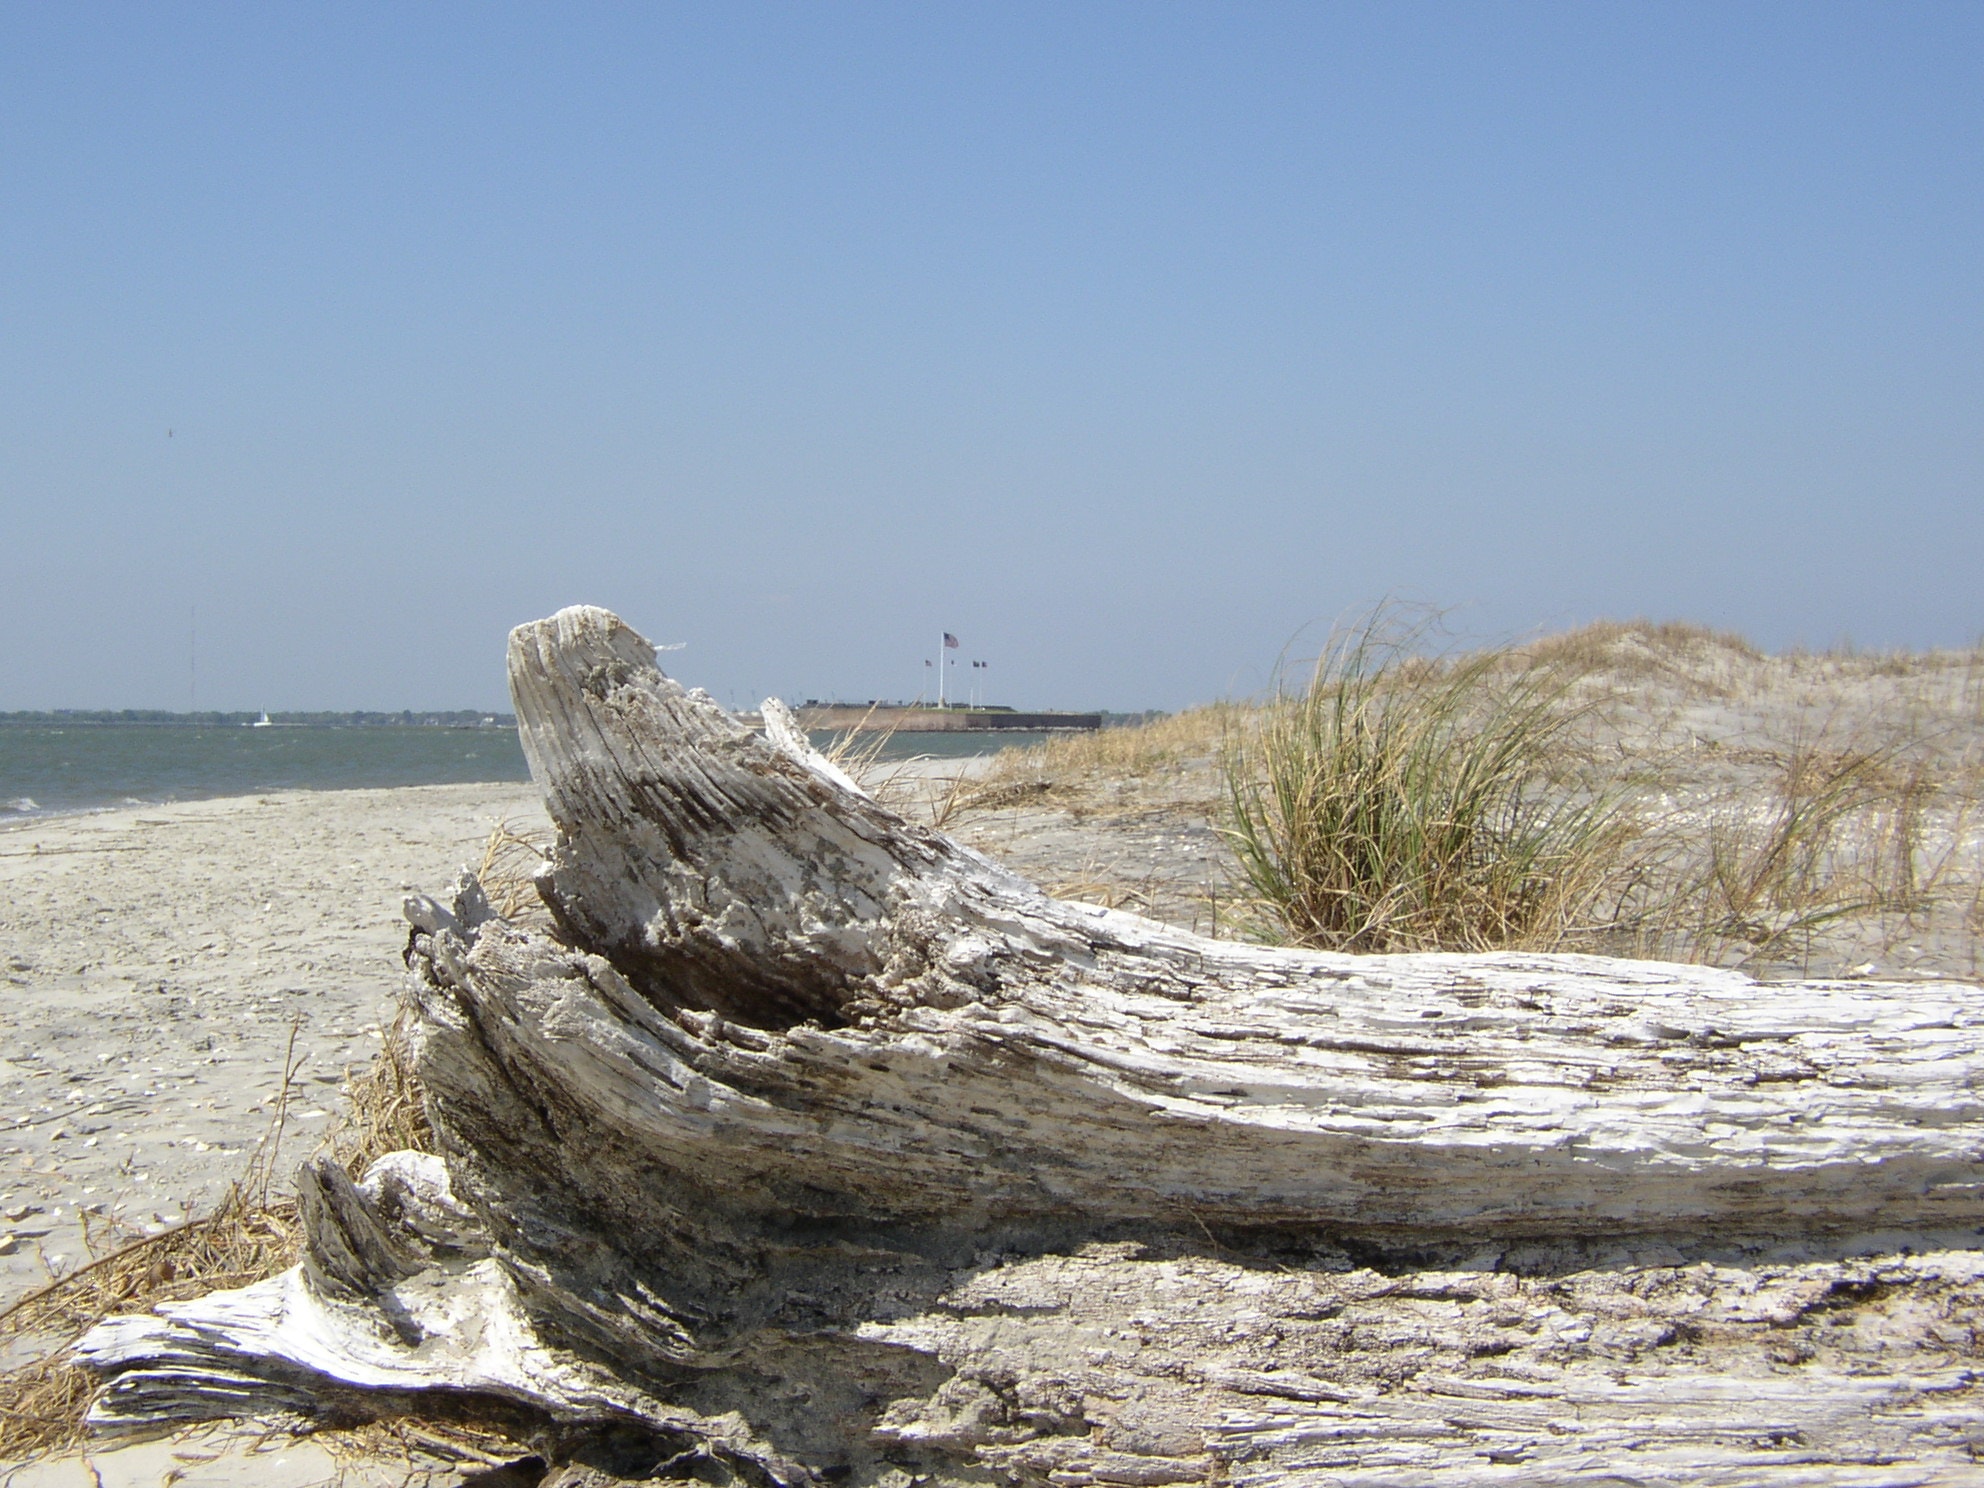 Looking at Fort Sumter (in background) sitting on beach near driftwood